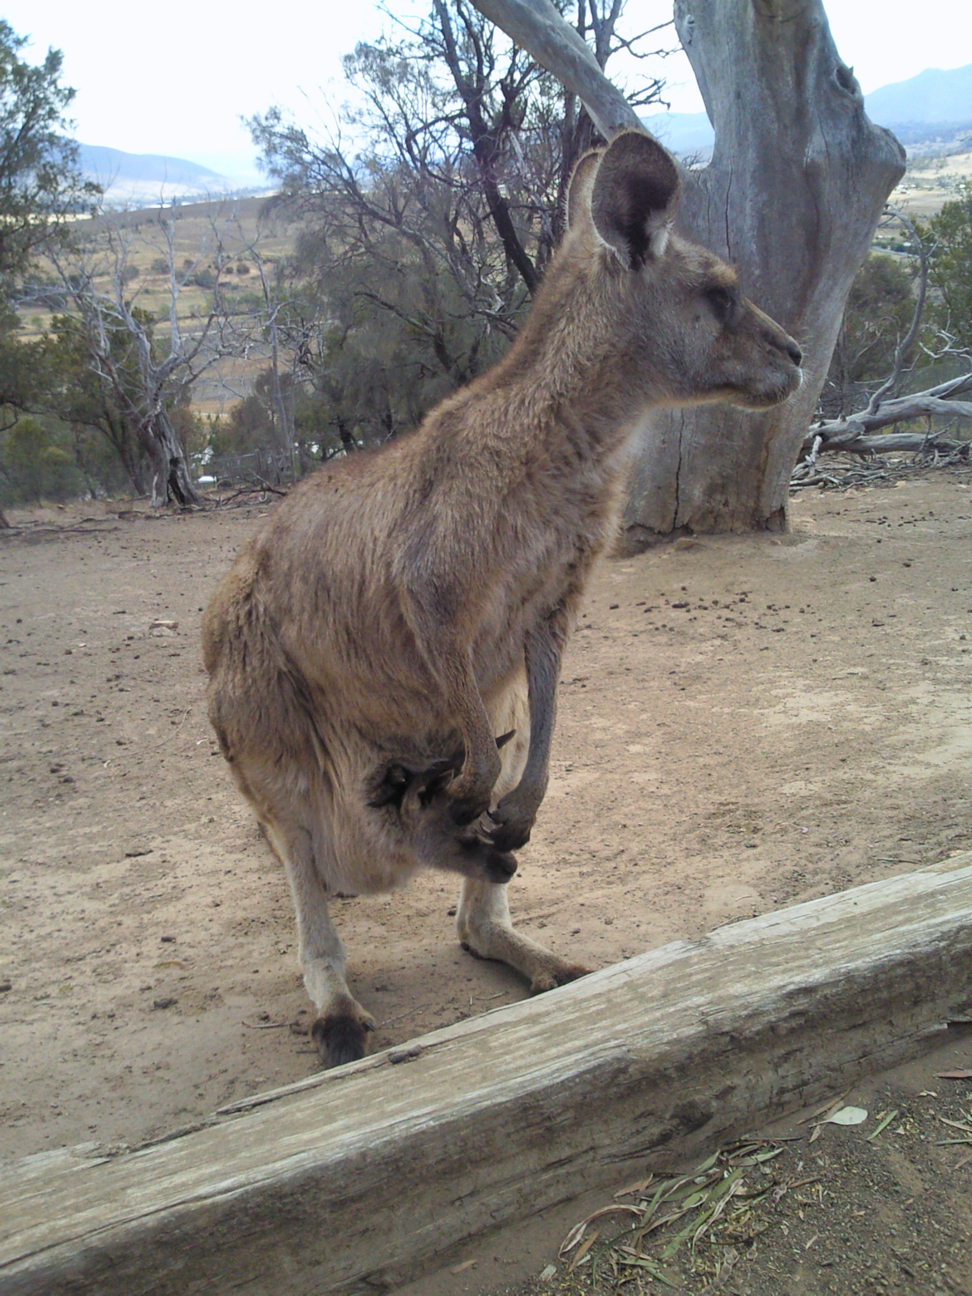 a small kangaroo jumping into the air with trees in the background